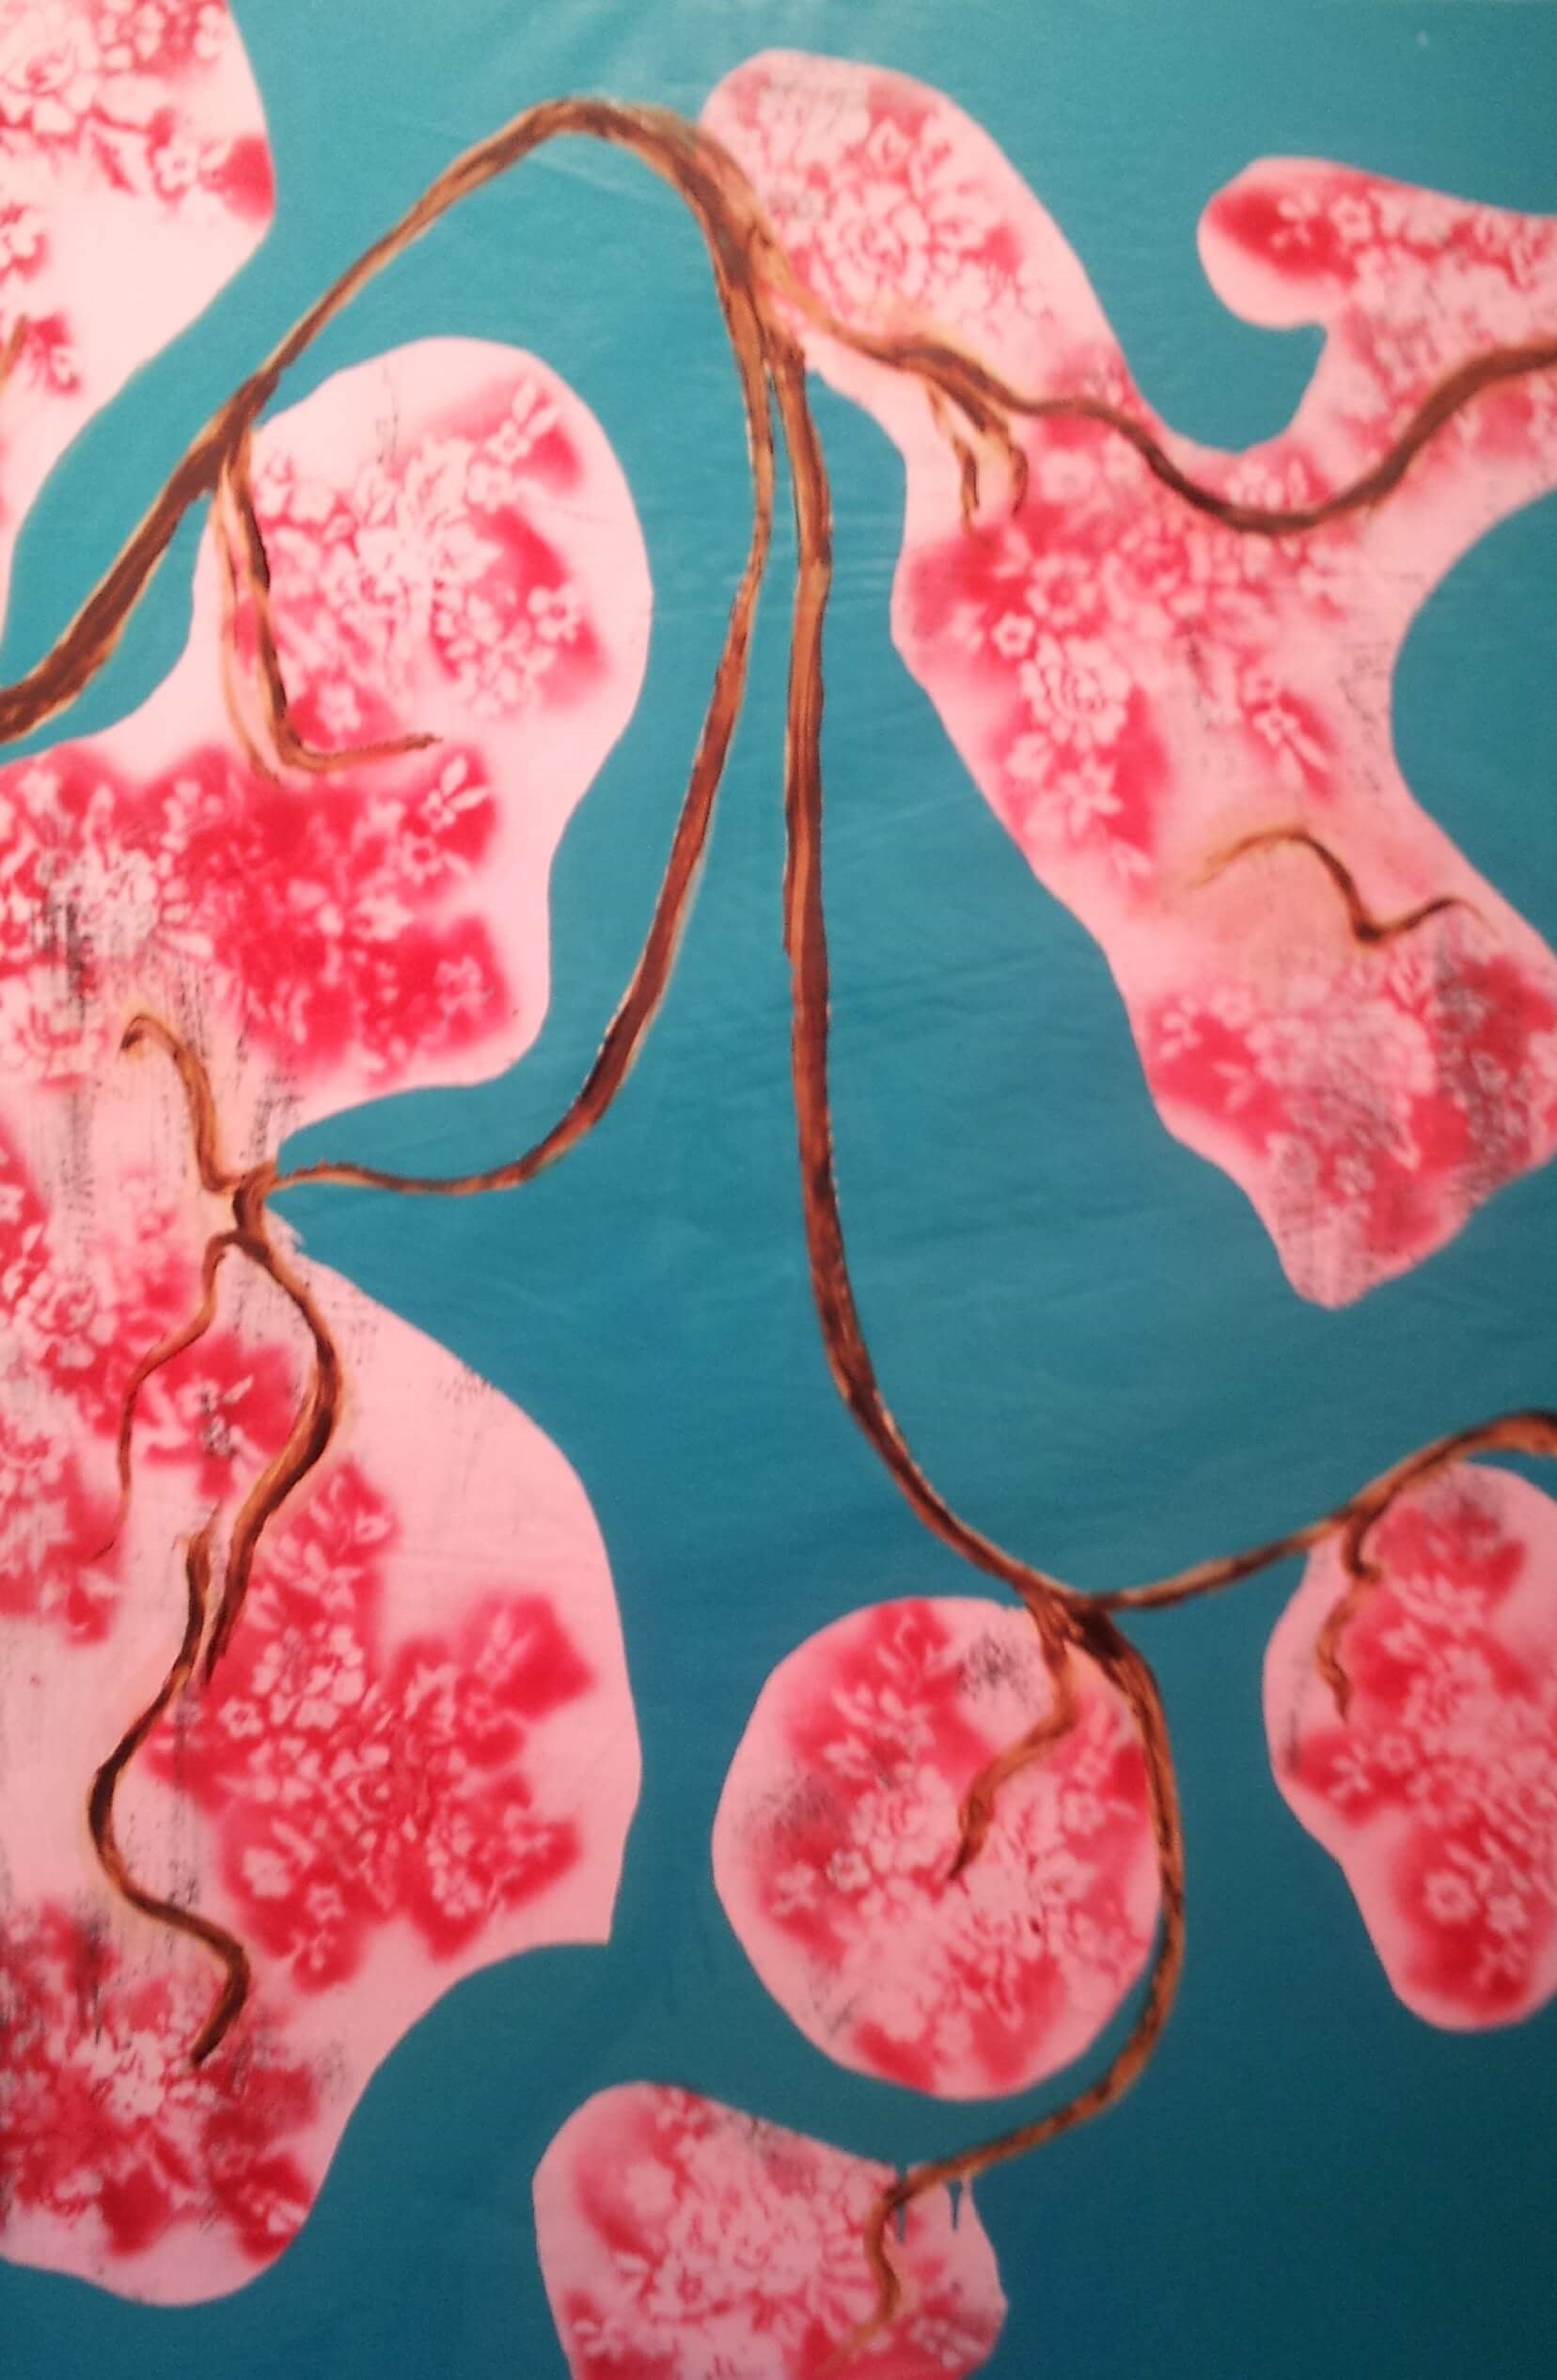 Peach Blossom Song Series III. Oil, enamel on plastic. art collection, contemporary art, abstract art, female artist, landscape painting, Australian landscape, turquoise, pink blossom, song